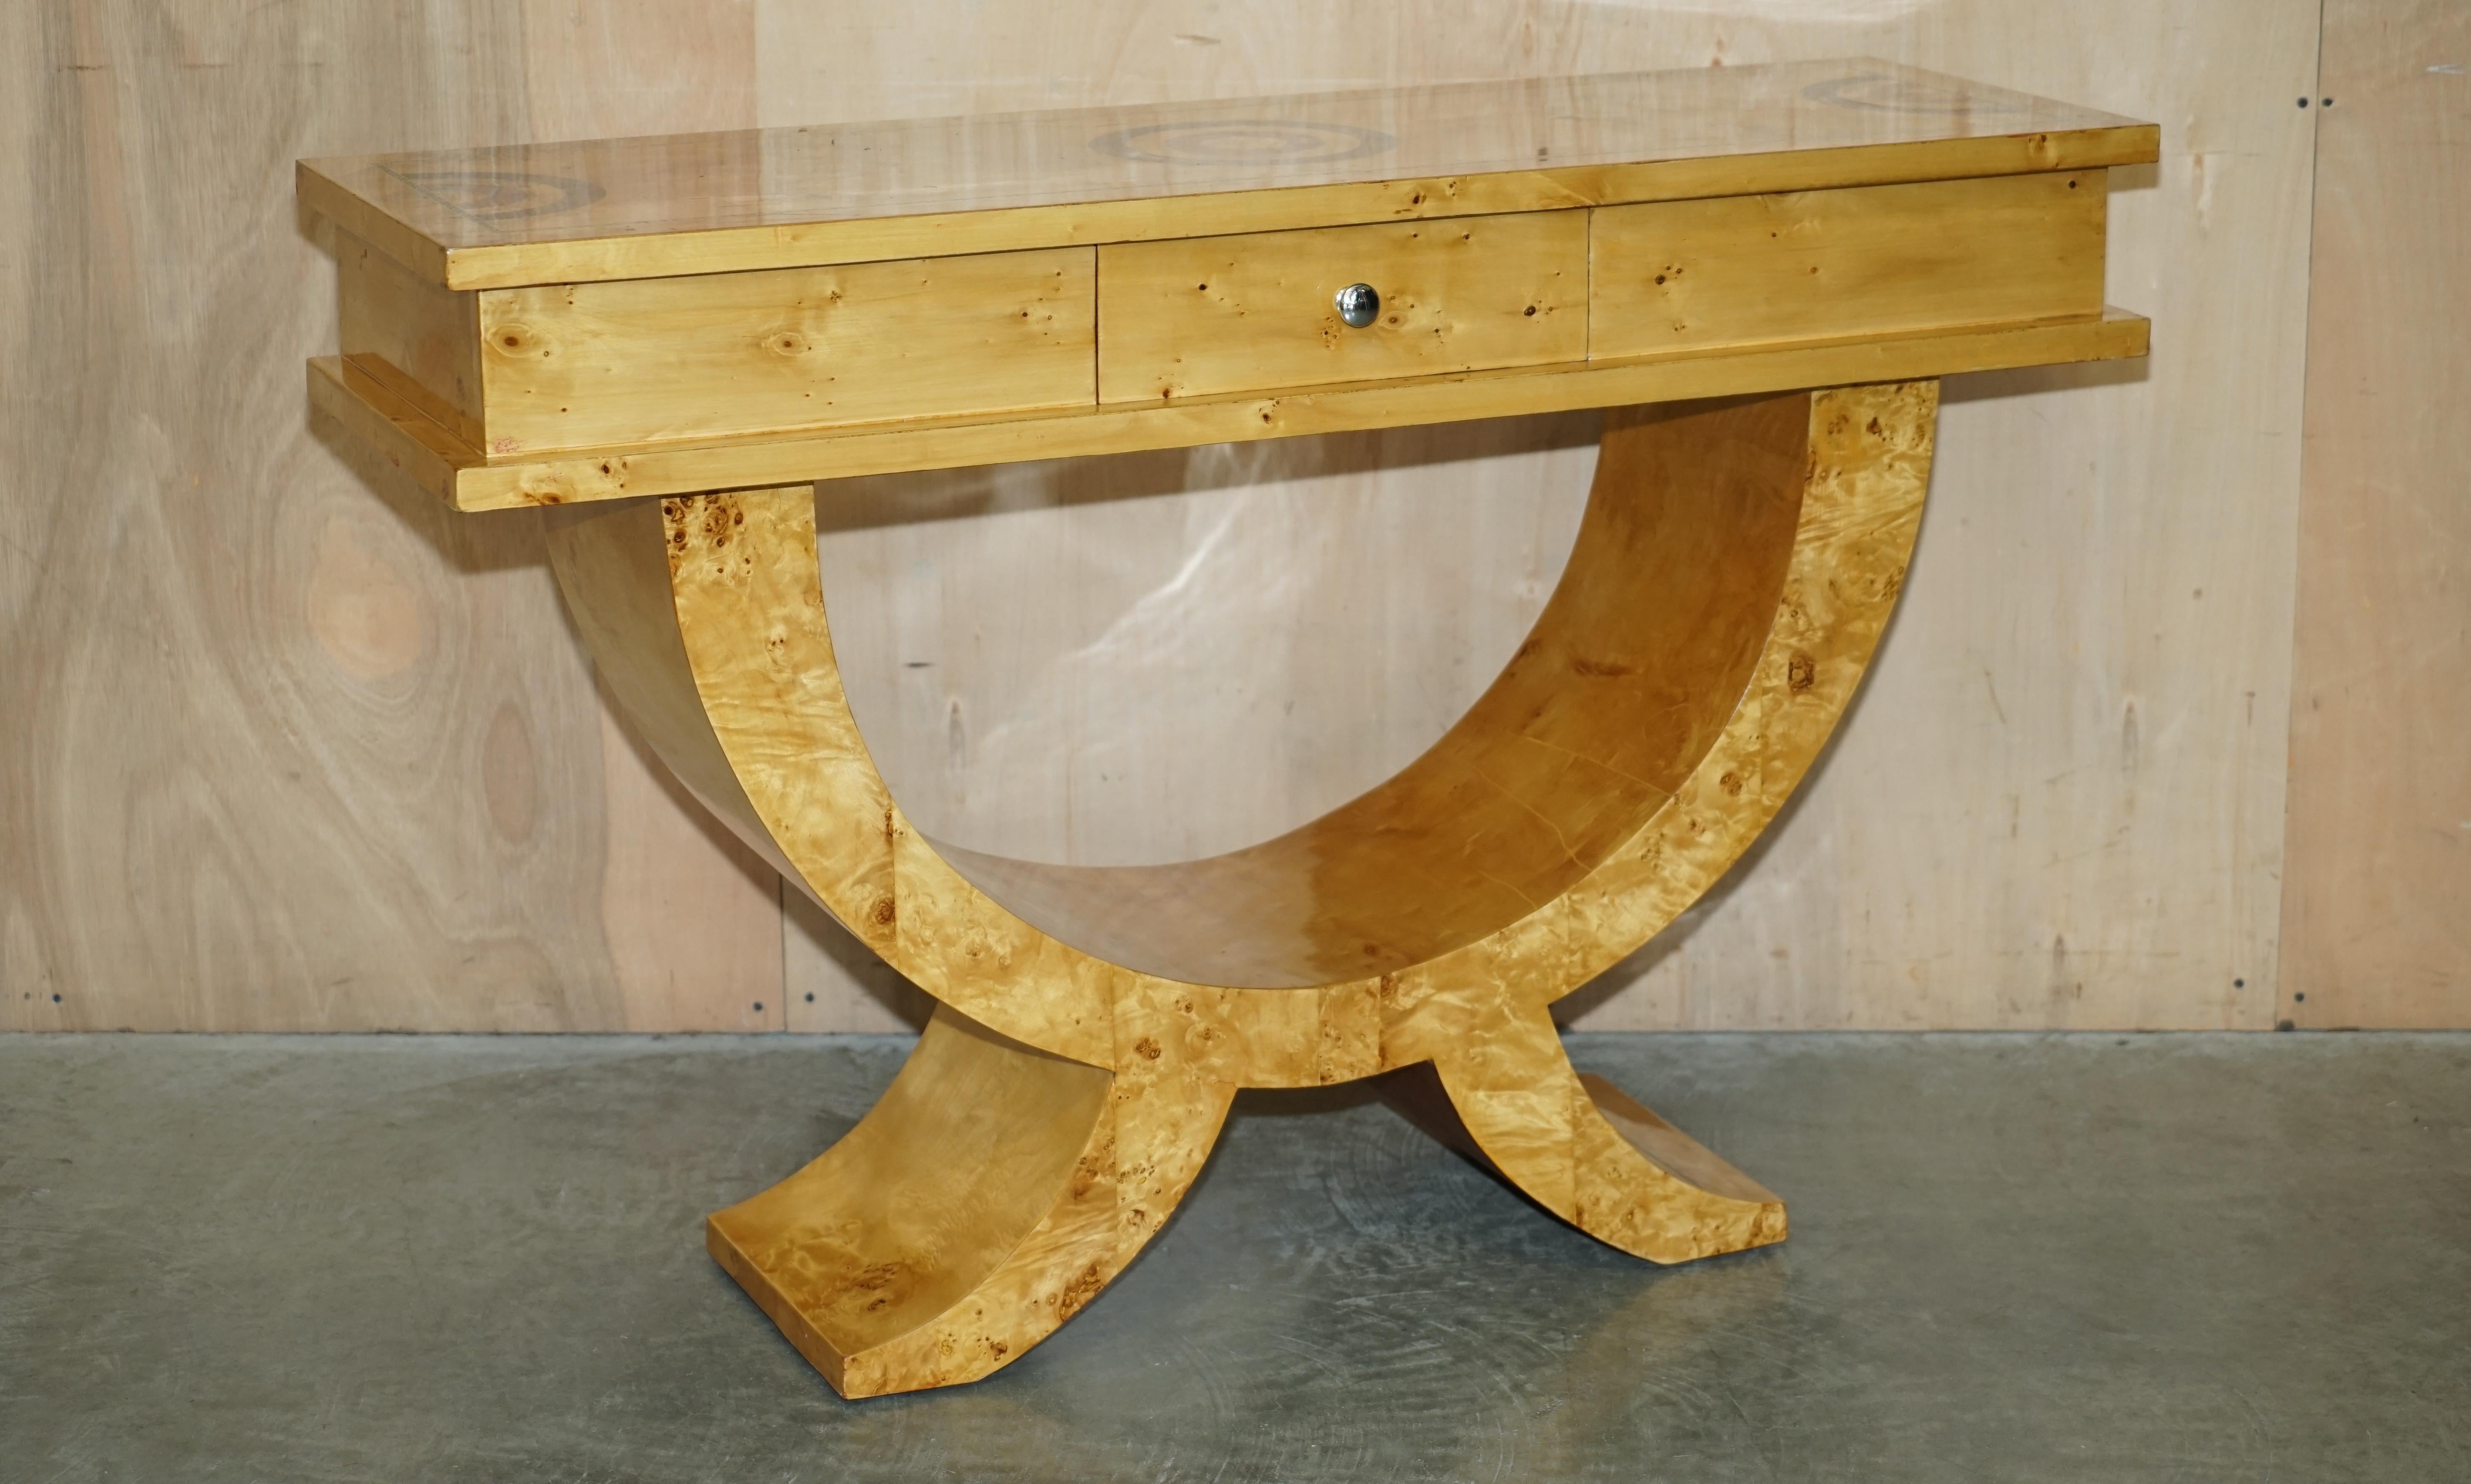 Royal House Antiques

Royal House Antiques is delighted to offer for sale this sublime Burr Walnut & Birch large console table with single drawer and very decorative top in the Art Deco style 

Please note the delivery fee listed is just a guide, it